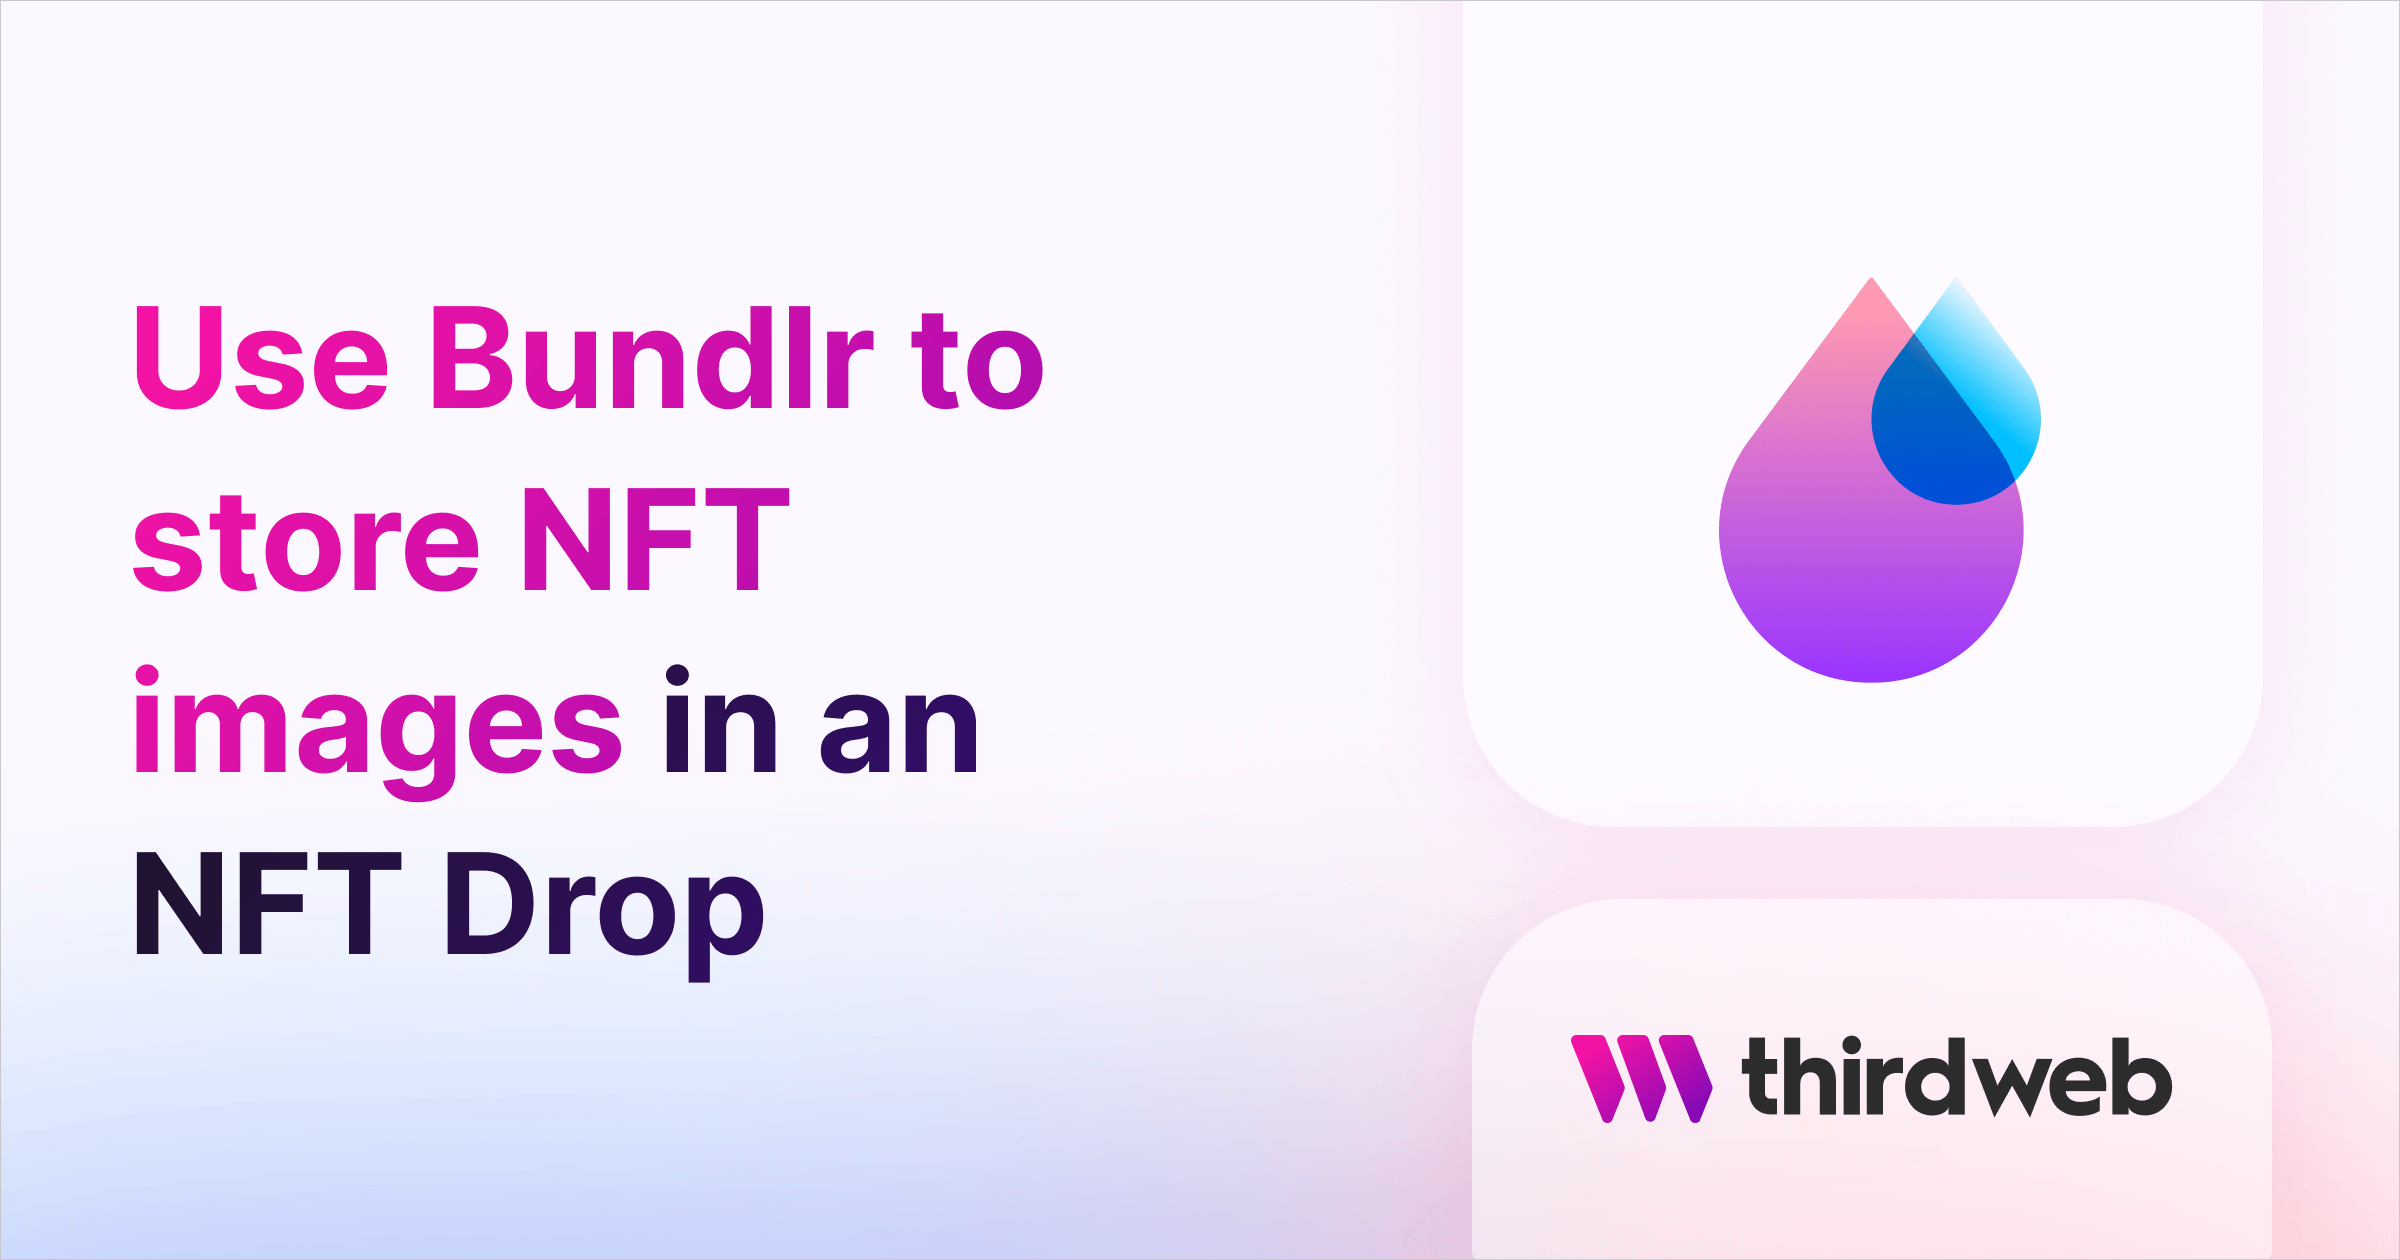 Use Bundlr to store NFT images in an NFT Drop - thirdweb Guides